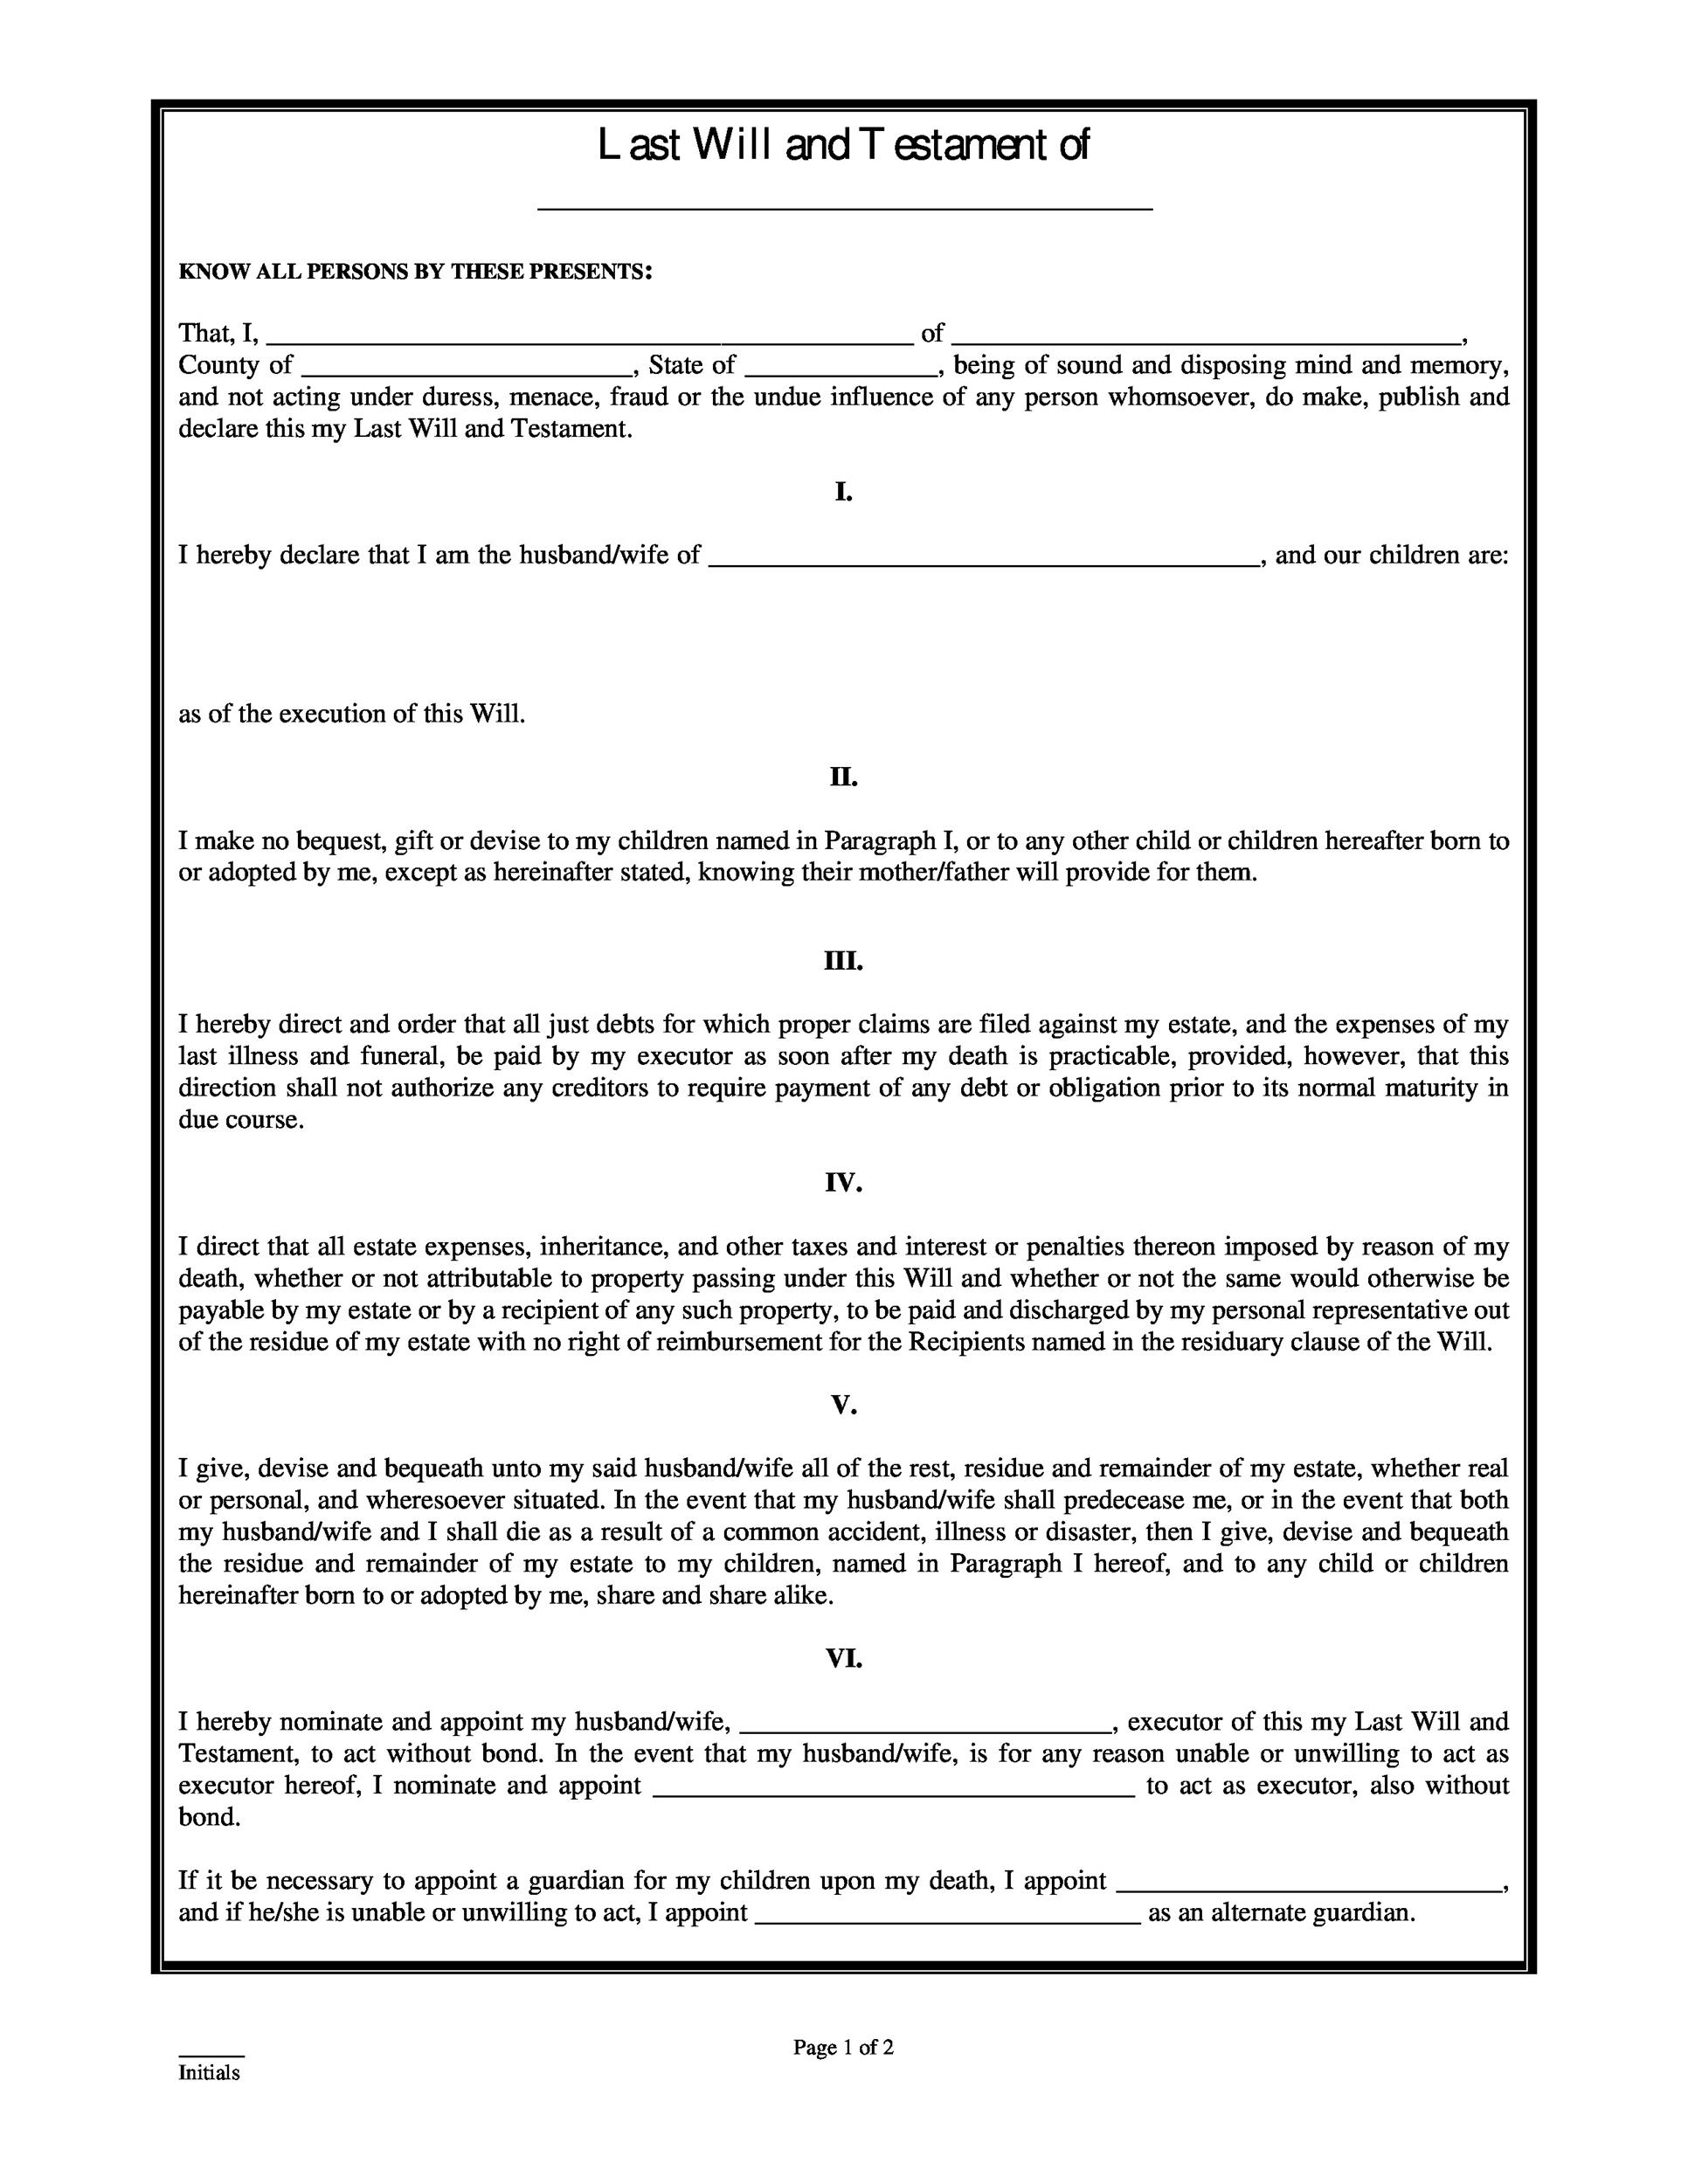 free-last-will-and-testament-printable-form-sample-last-will-and